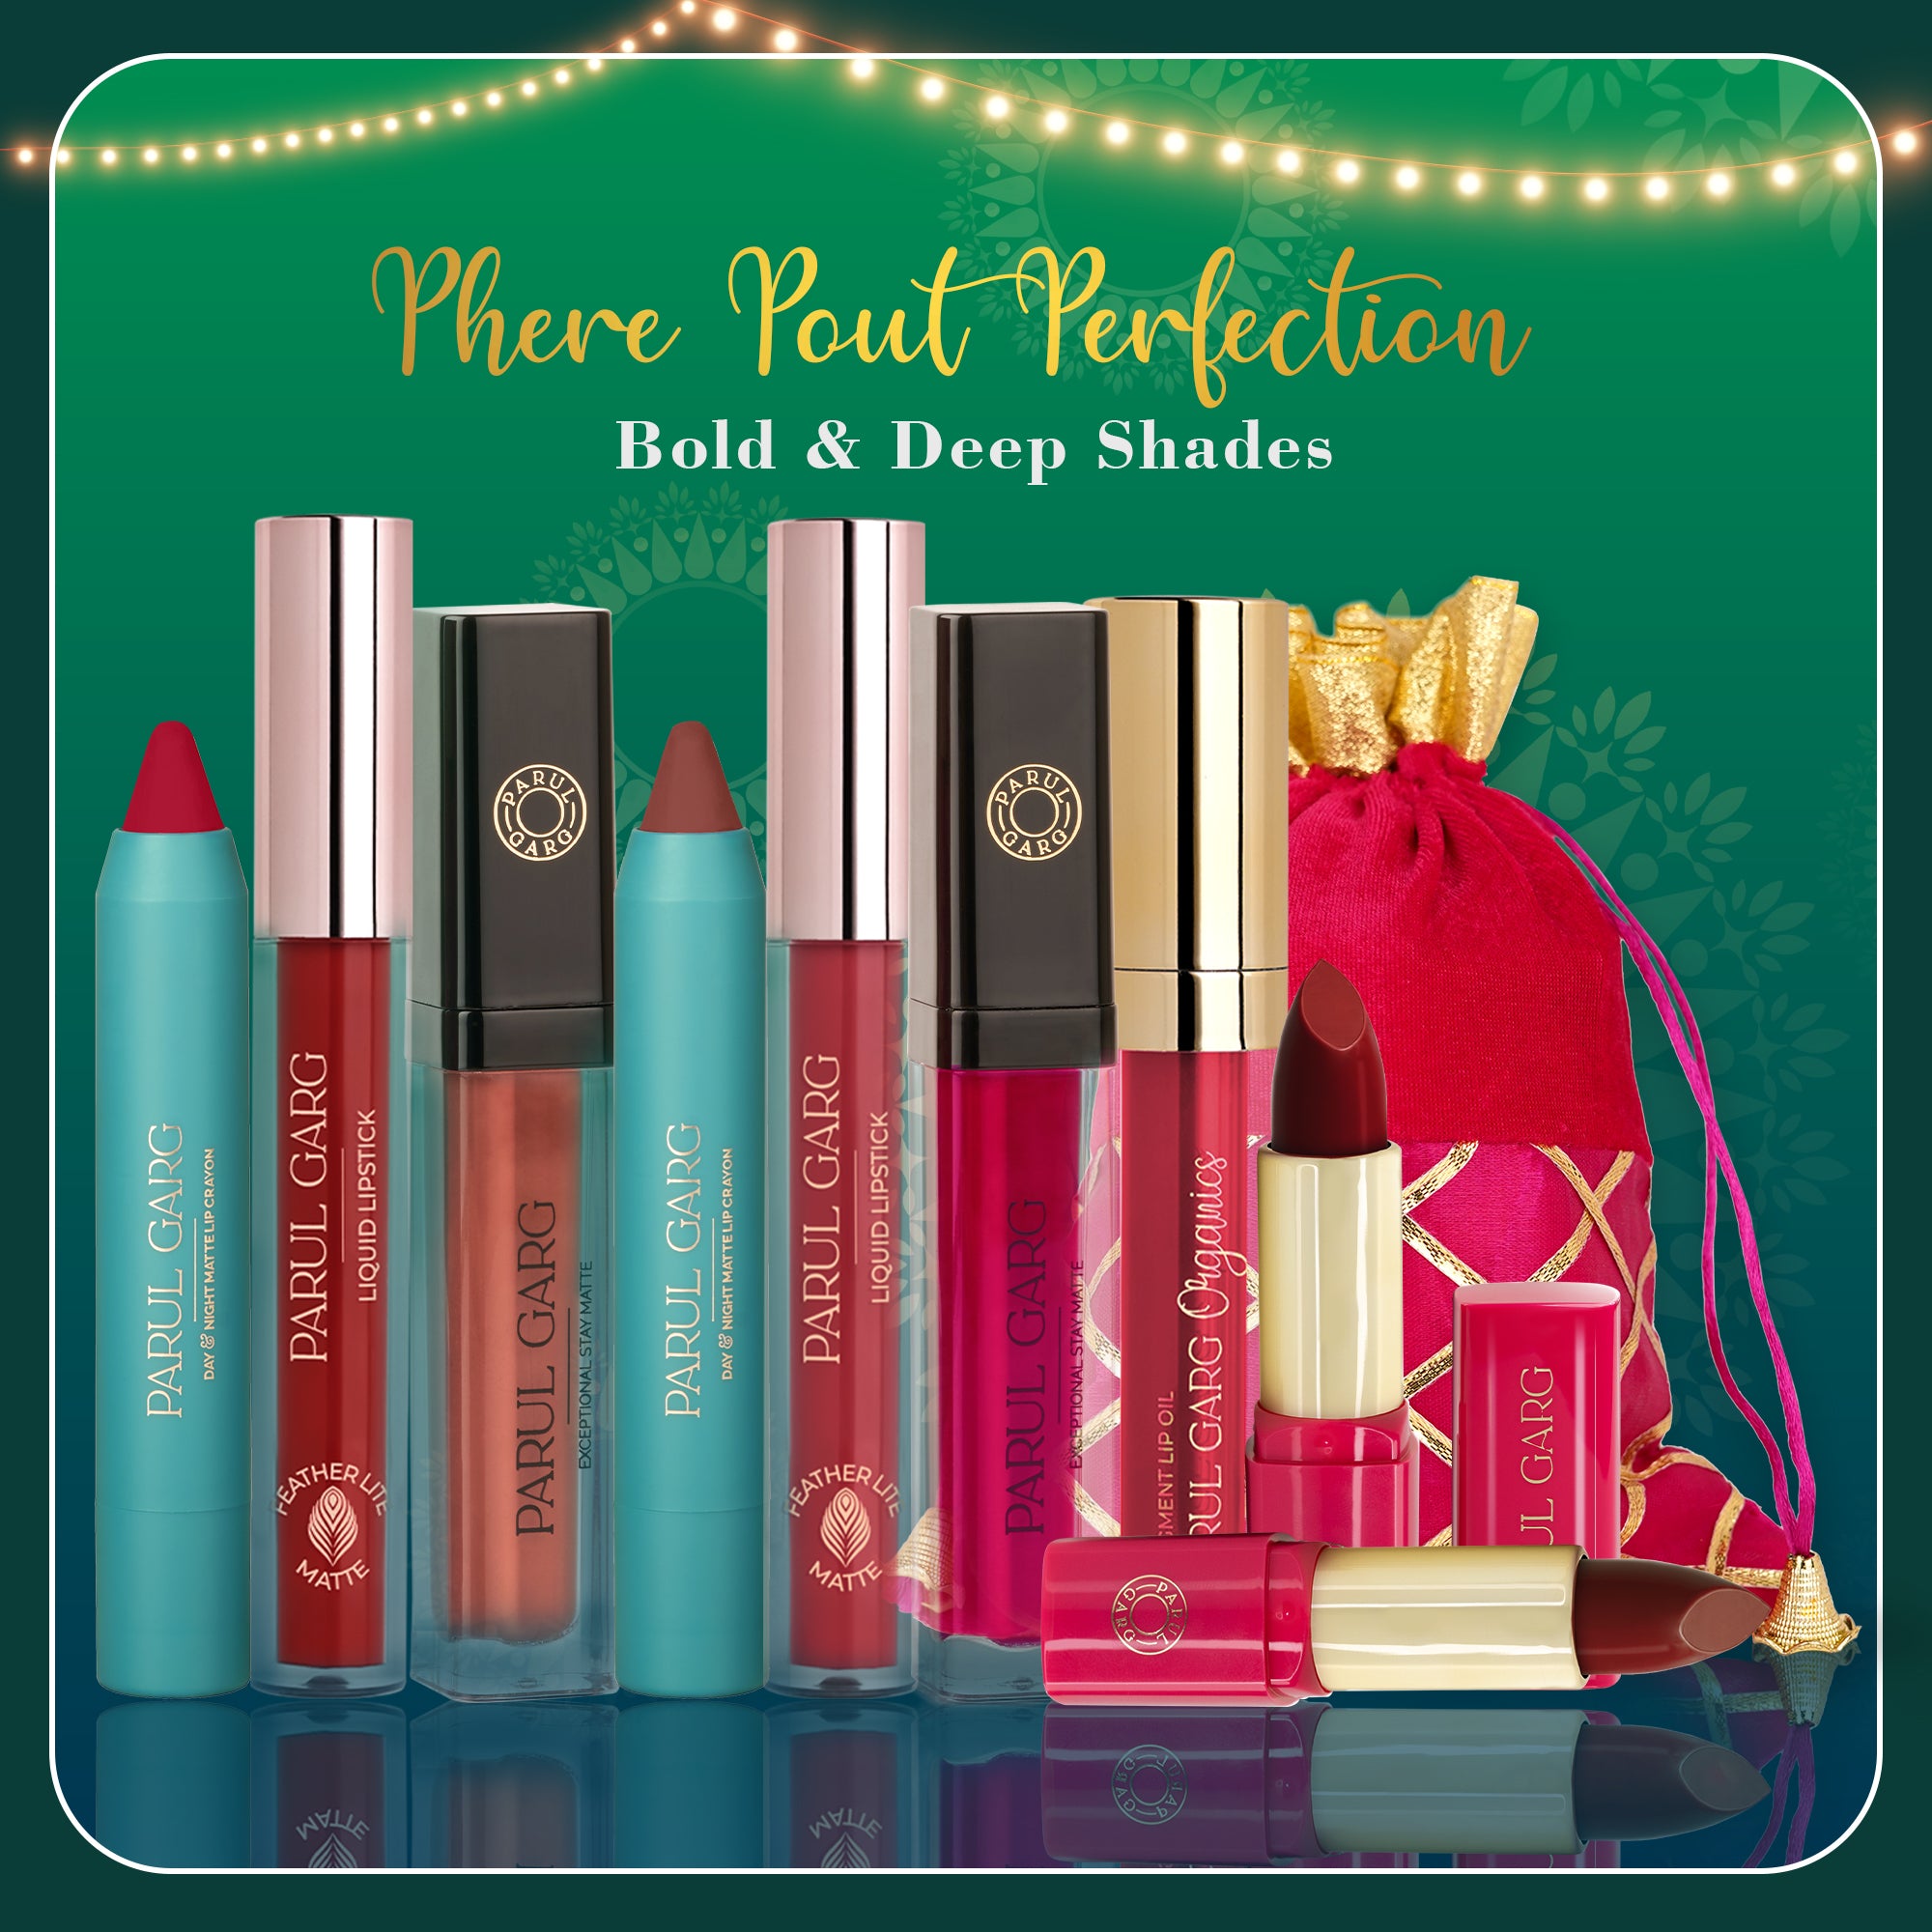 Phere Pout Perfection Essential Lip Set: Bold & Deep Shades